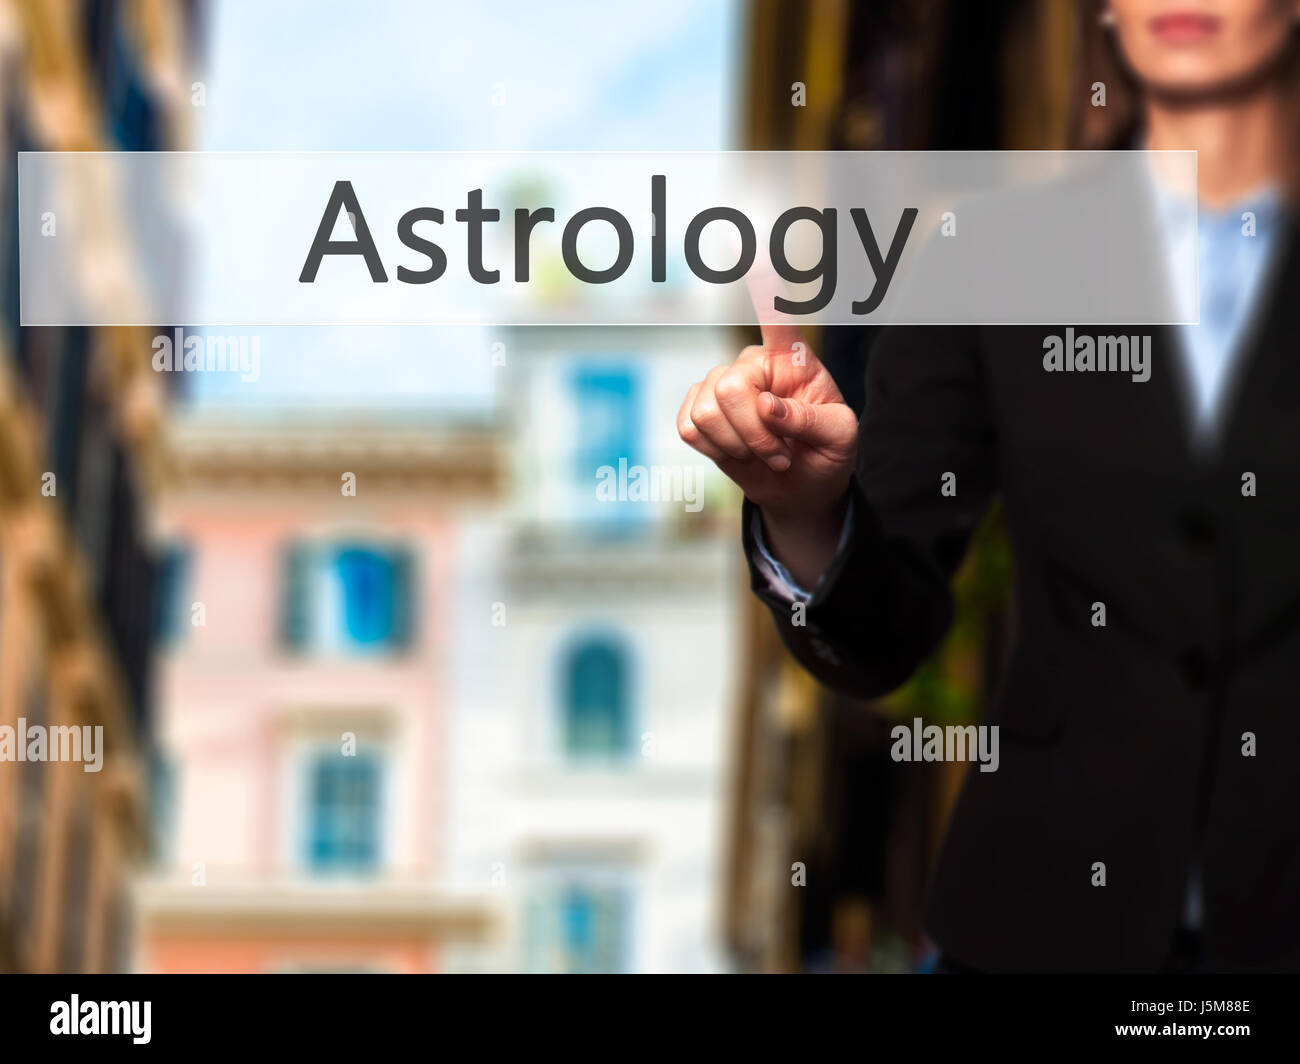 Astrology - Isolated female hand touching or pointing to button. Business and future technology concept. Stock Photo Stock Photo